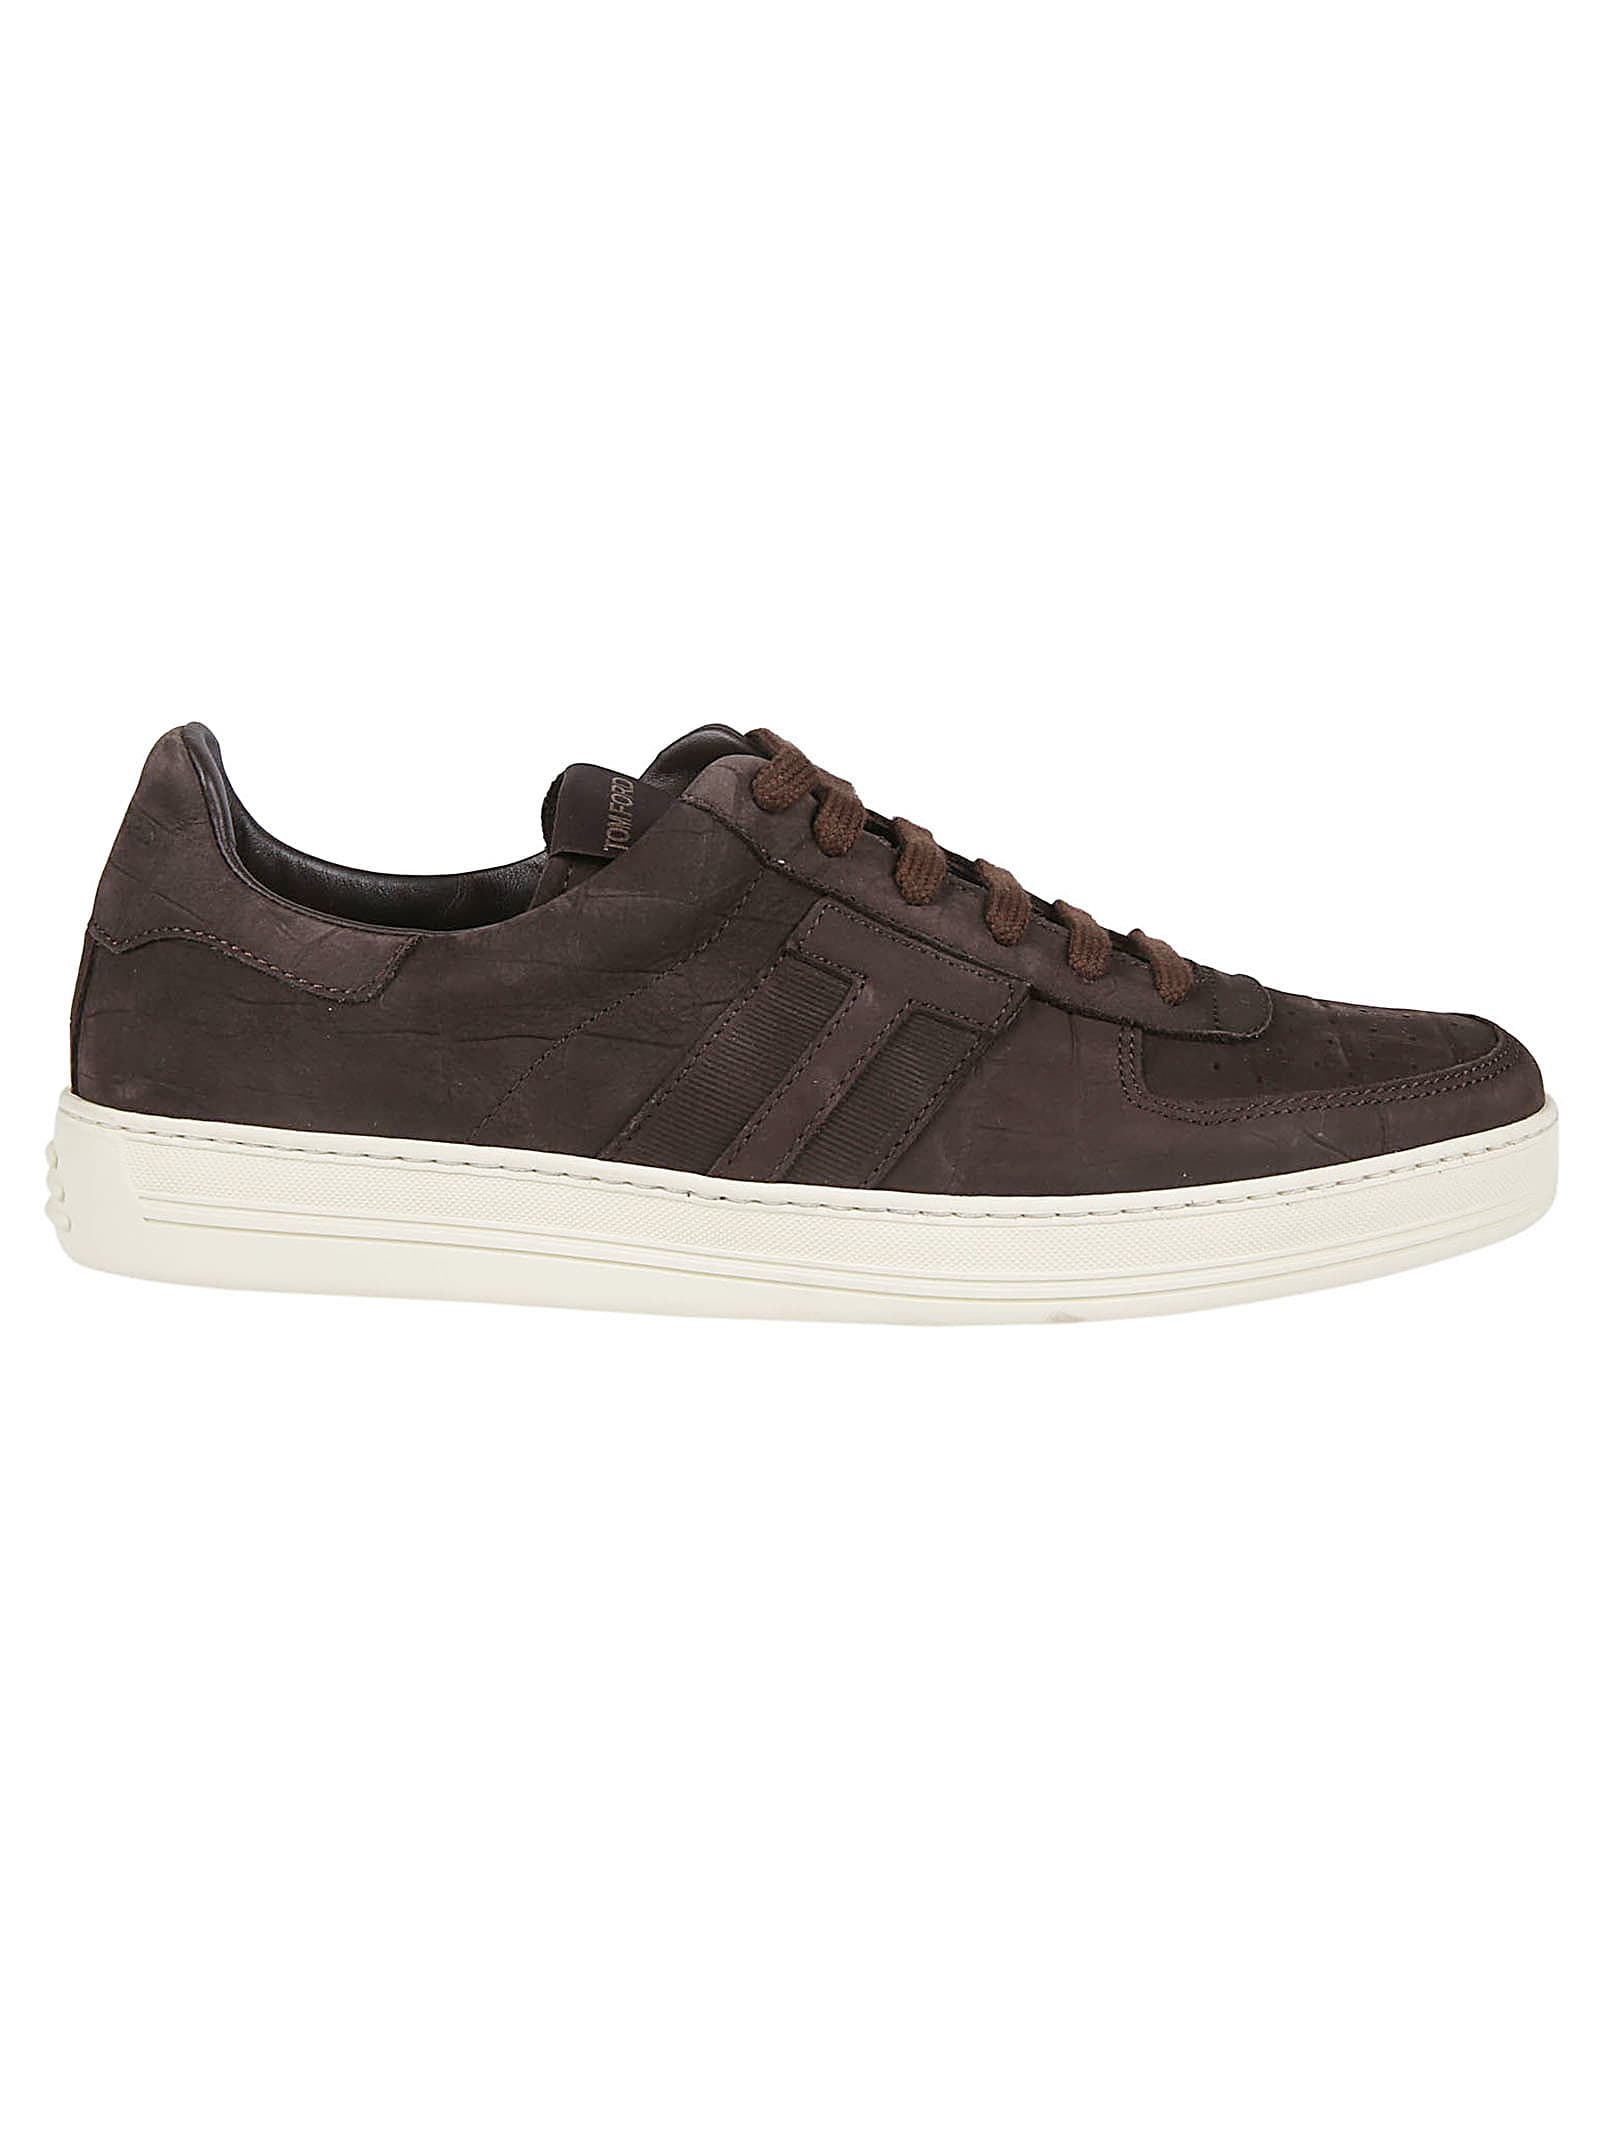 TOM FORD RADCLIFFE CROCODILE-EFFECT NUBUCK LOW TOP SNEAKERS